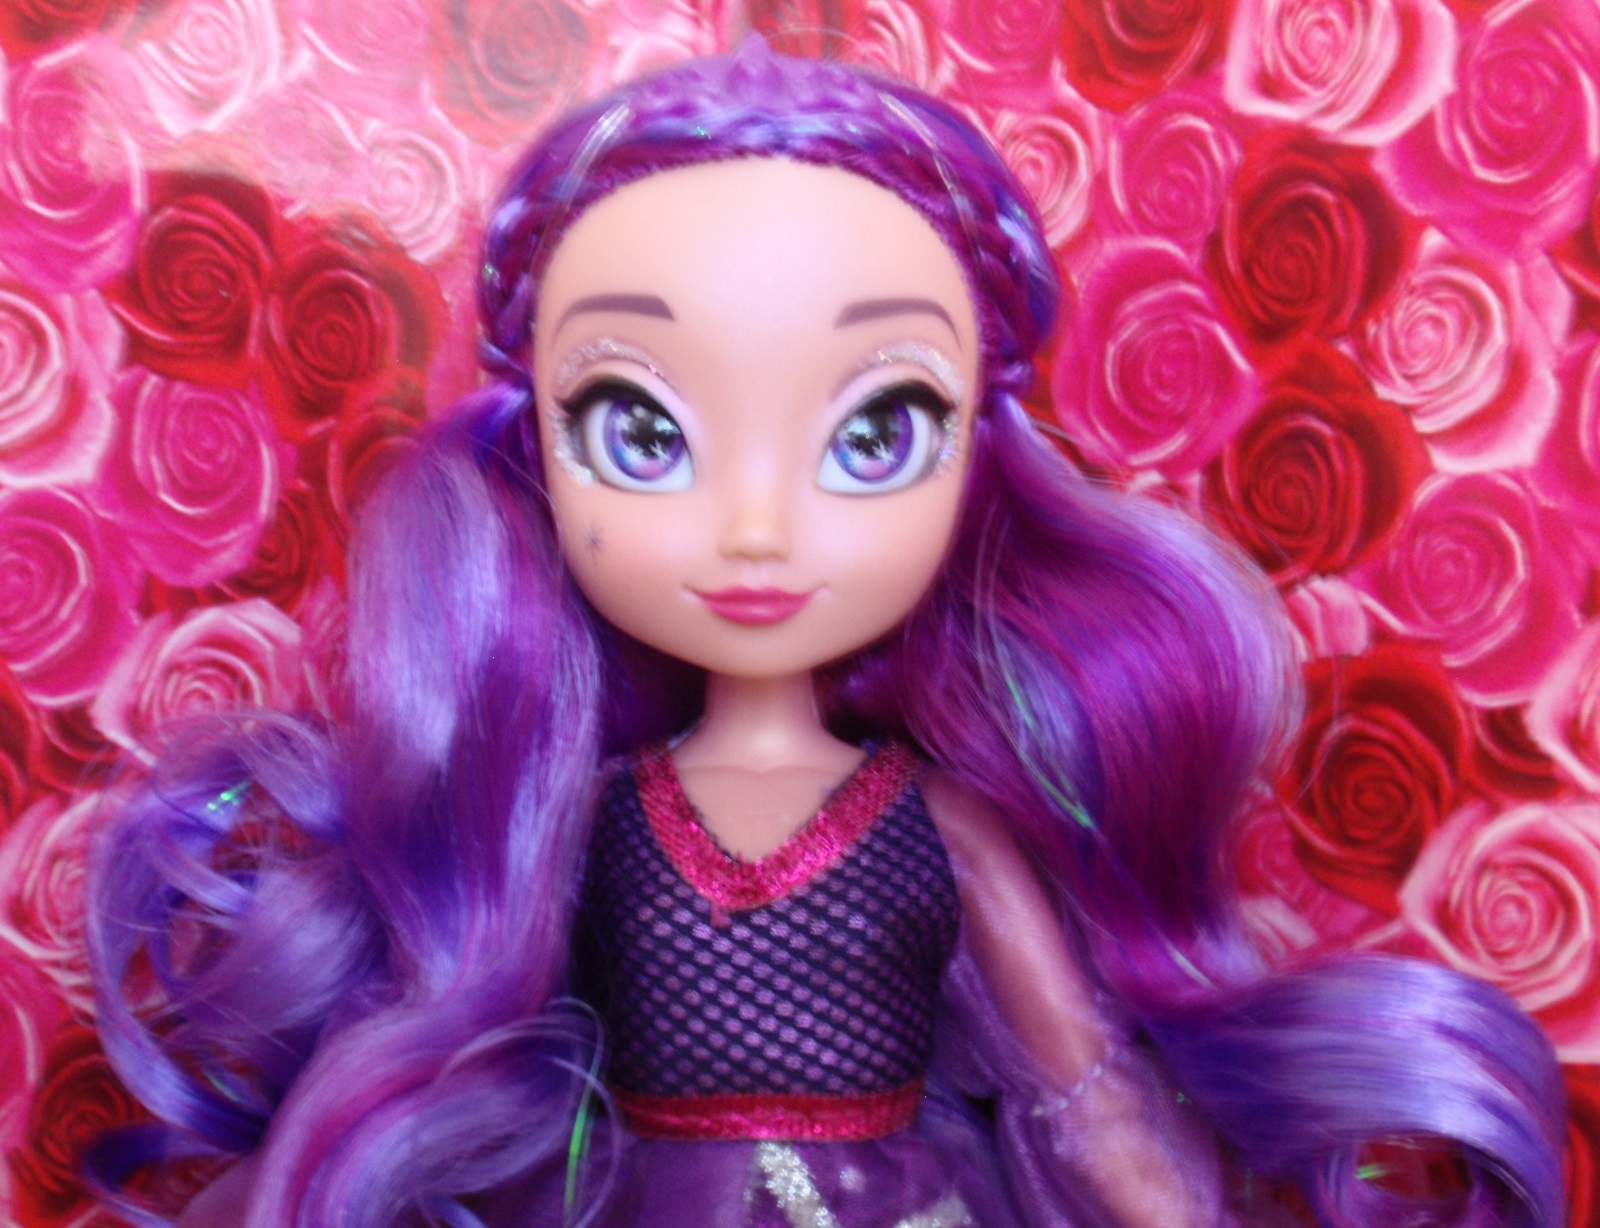 Ever After High~ 2015 Farrah Goodfairy Doll Daughter of The Fairy